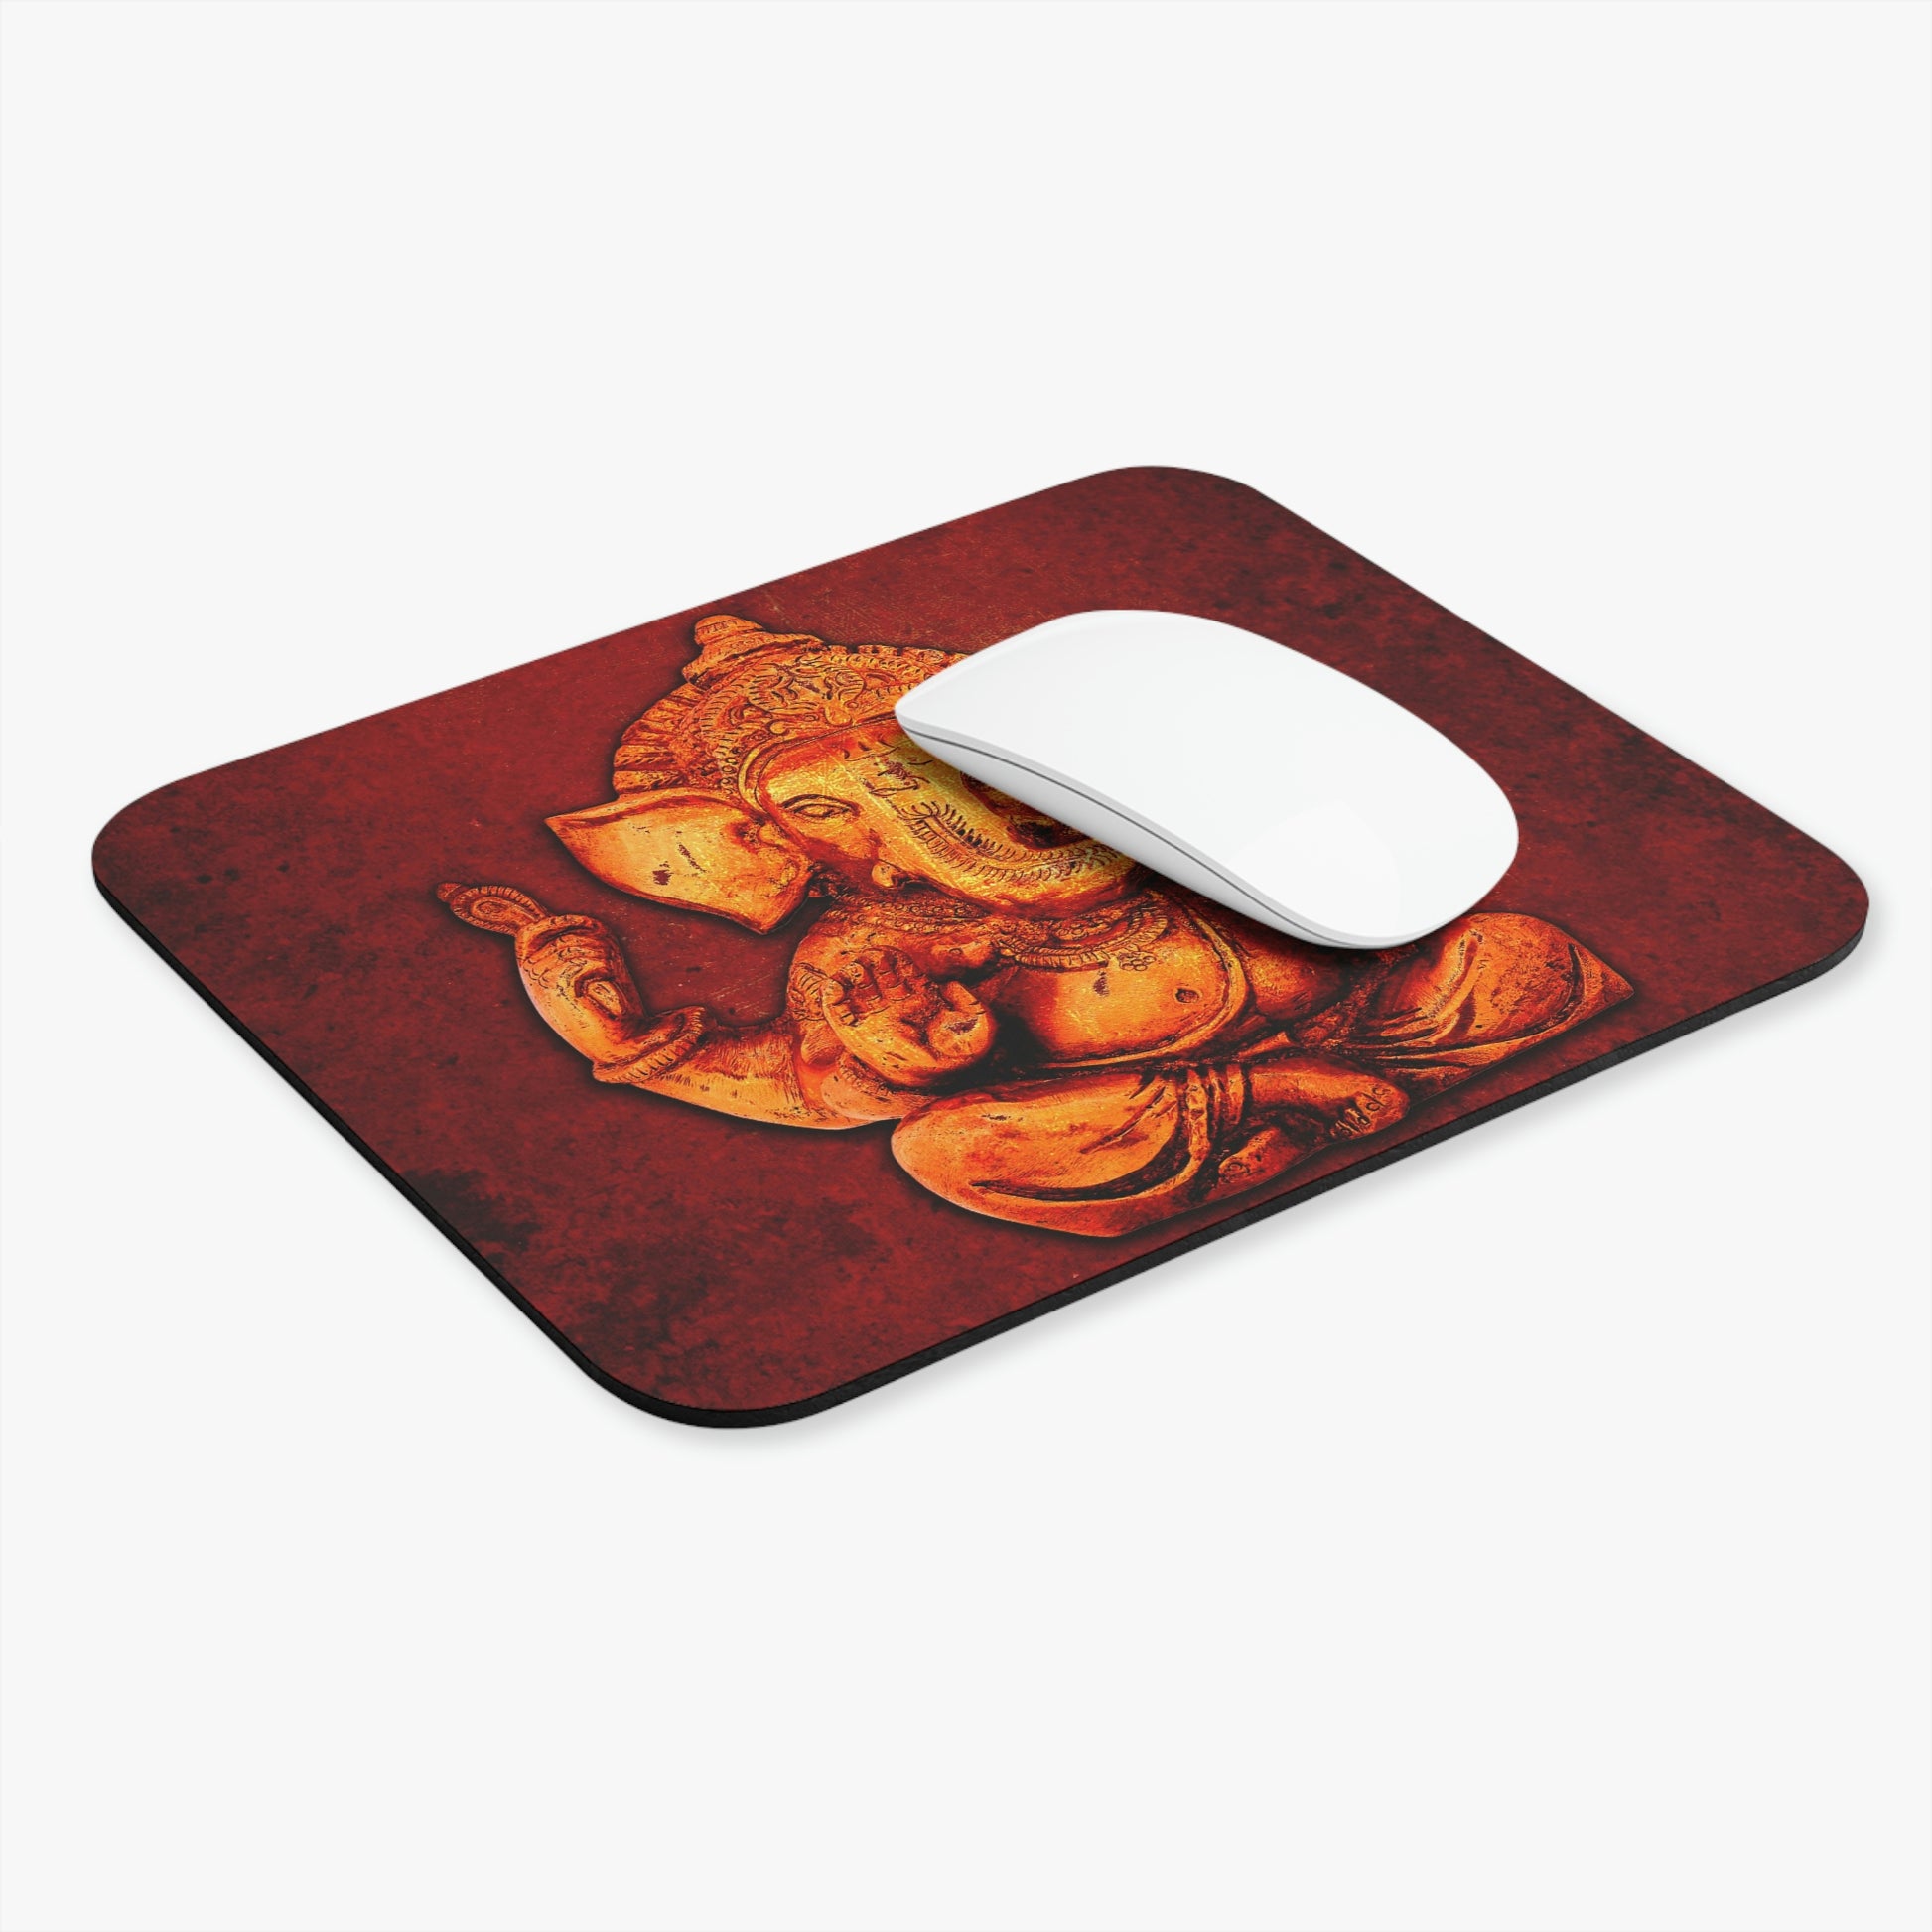 Hindu Deities Themed Desk Accessories - Gold Ganesha on Lava Red Background Print on Mouse Pad with mouse